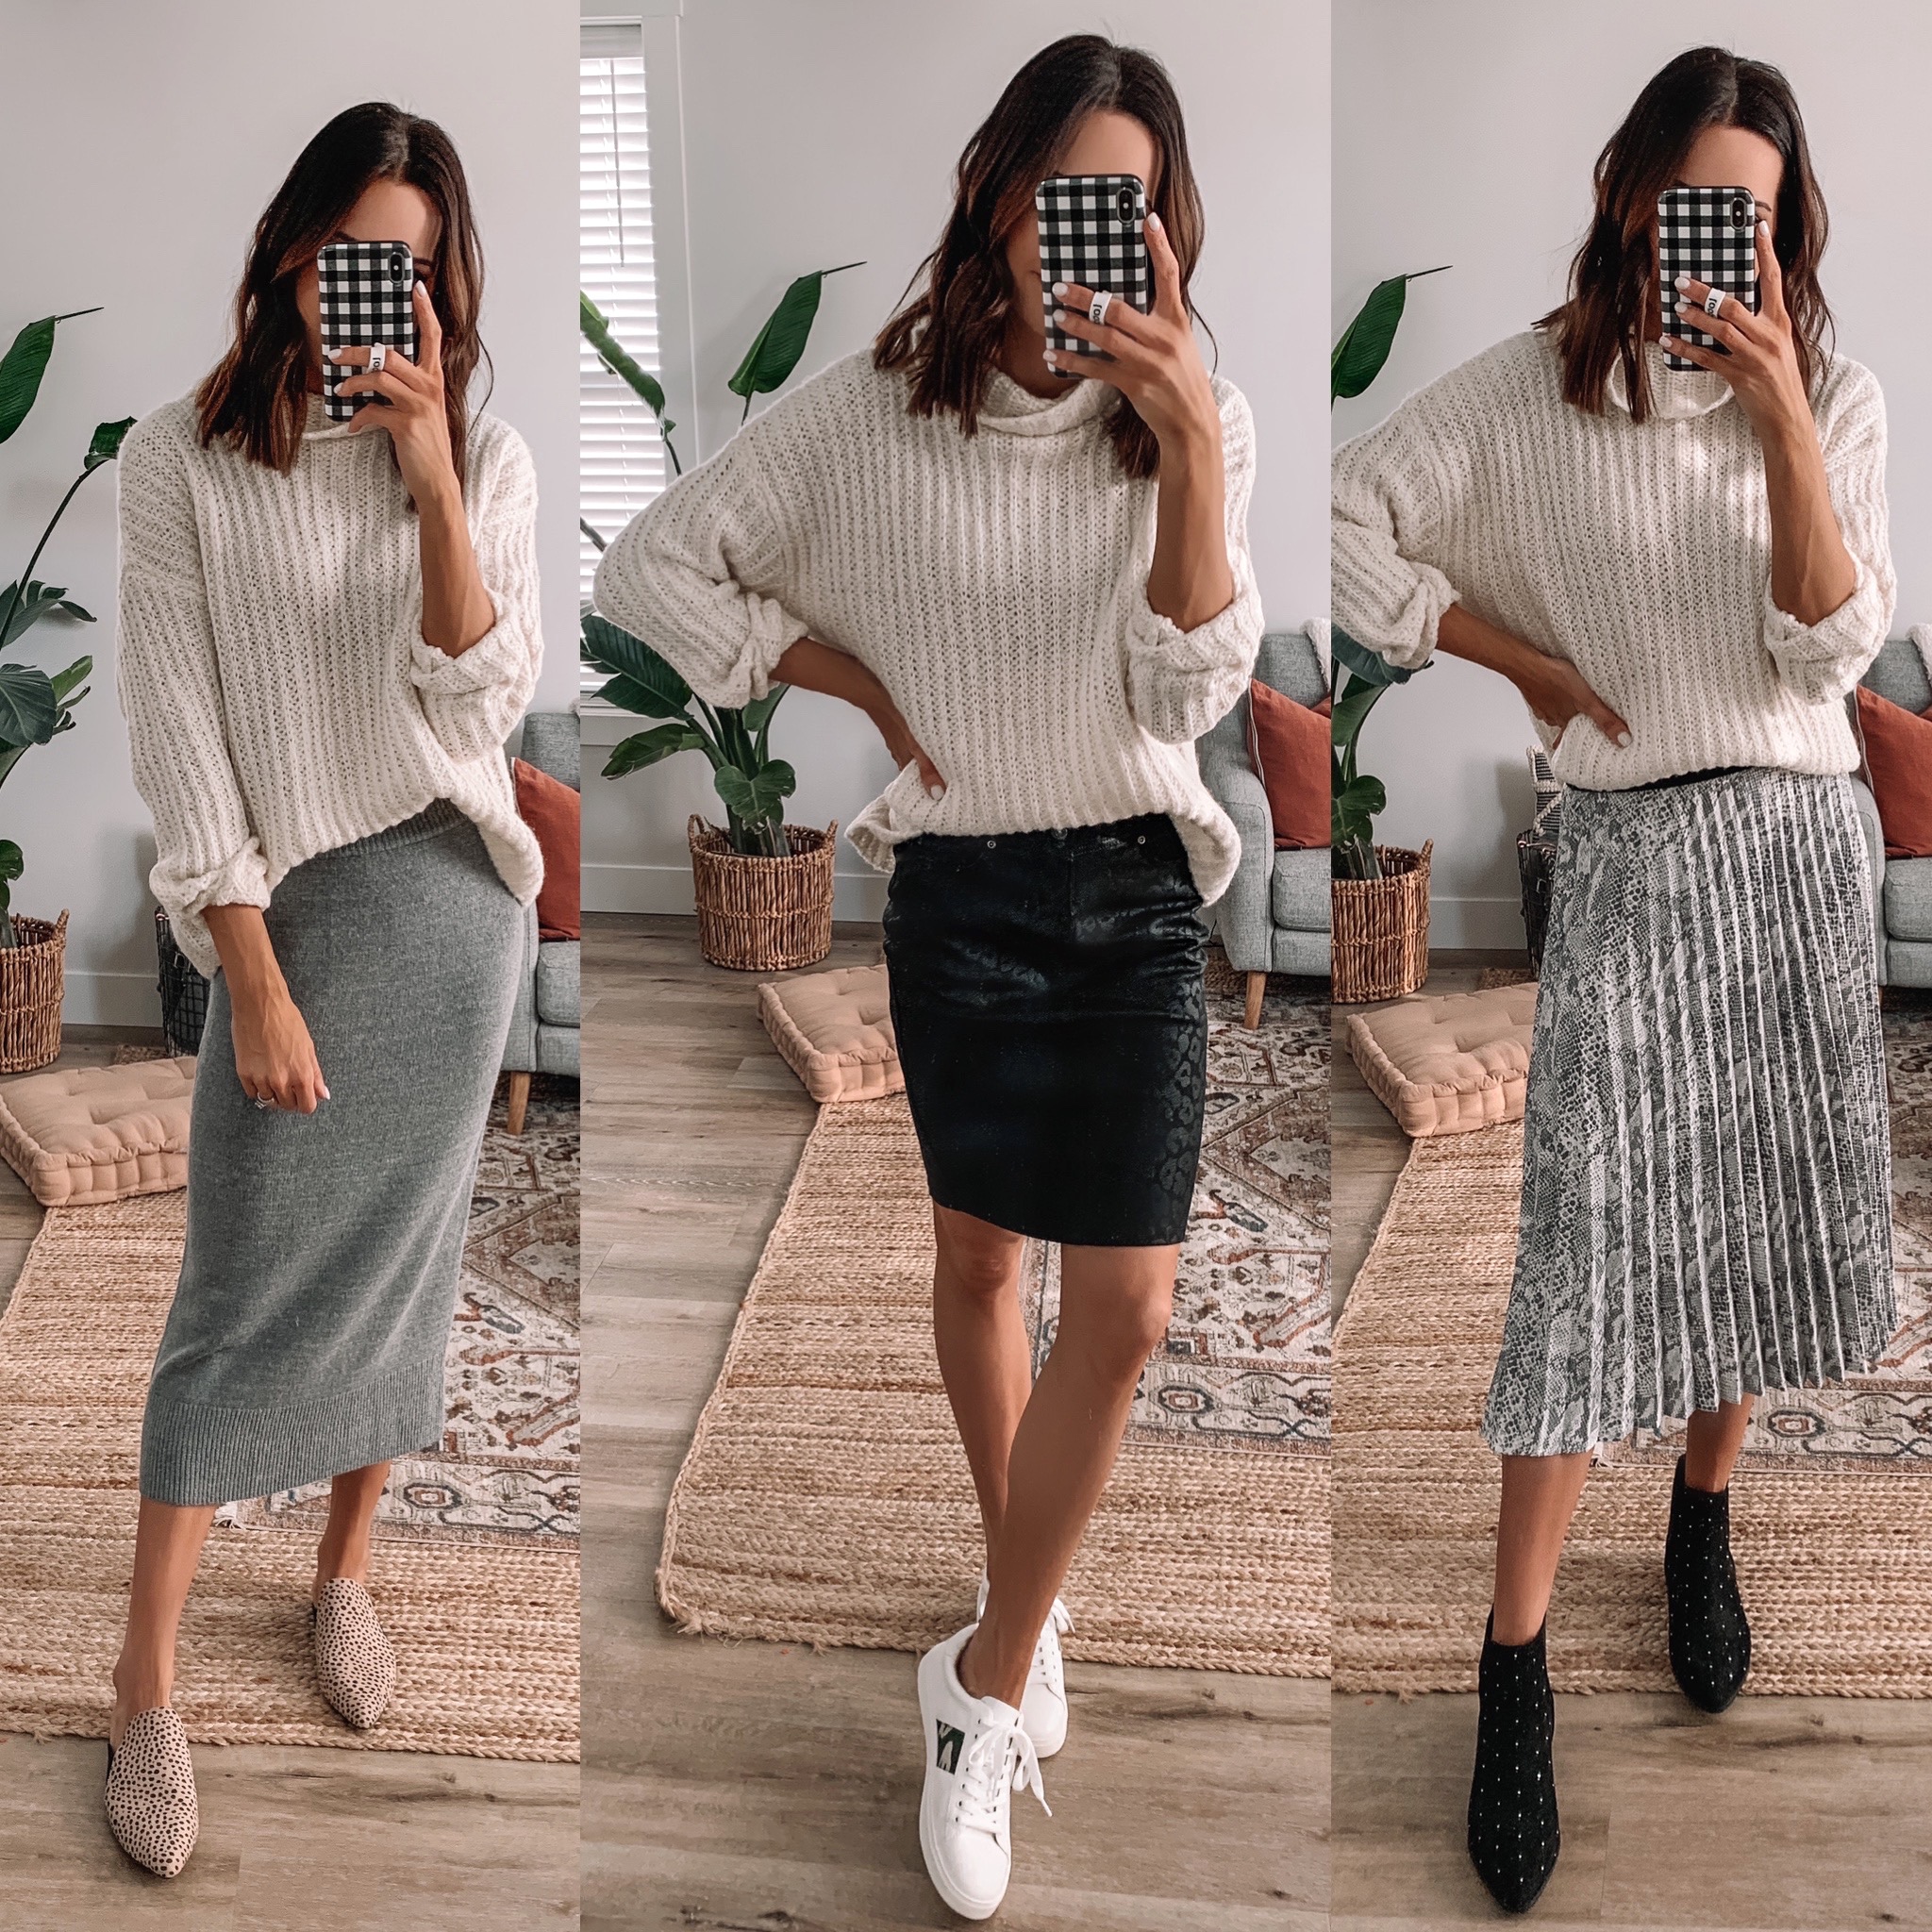 Skirt Outfit Styles Ideas, Skirt Outfits For Winter